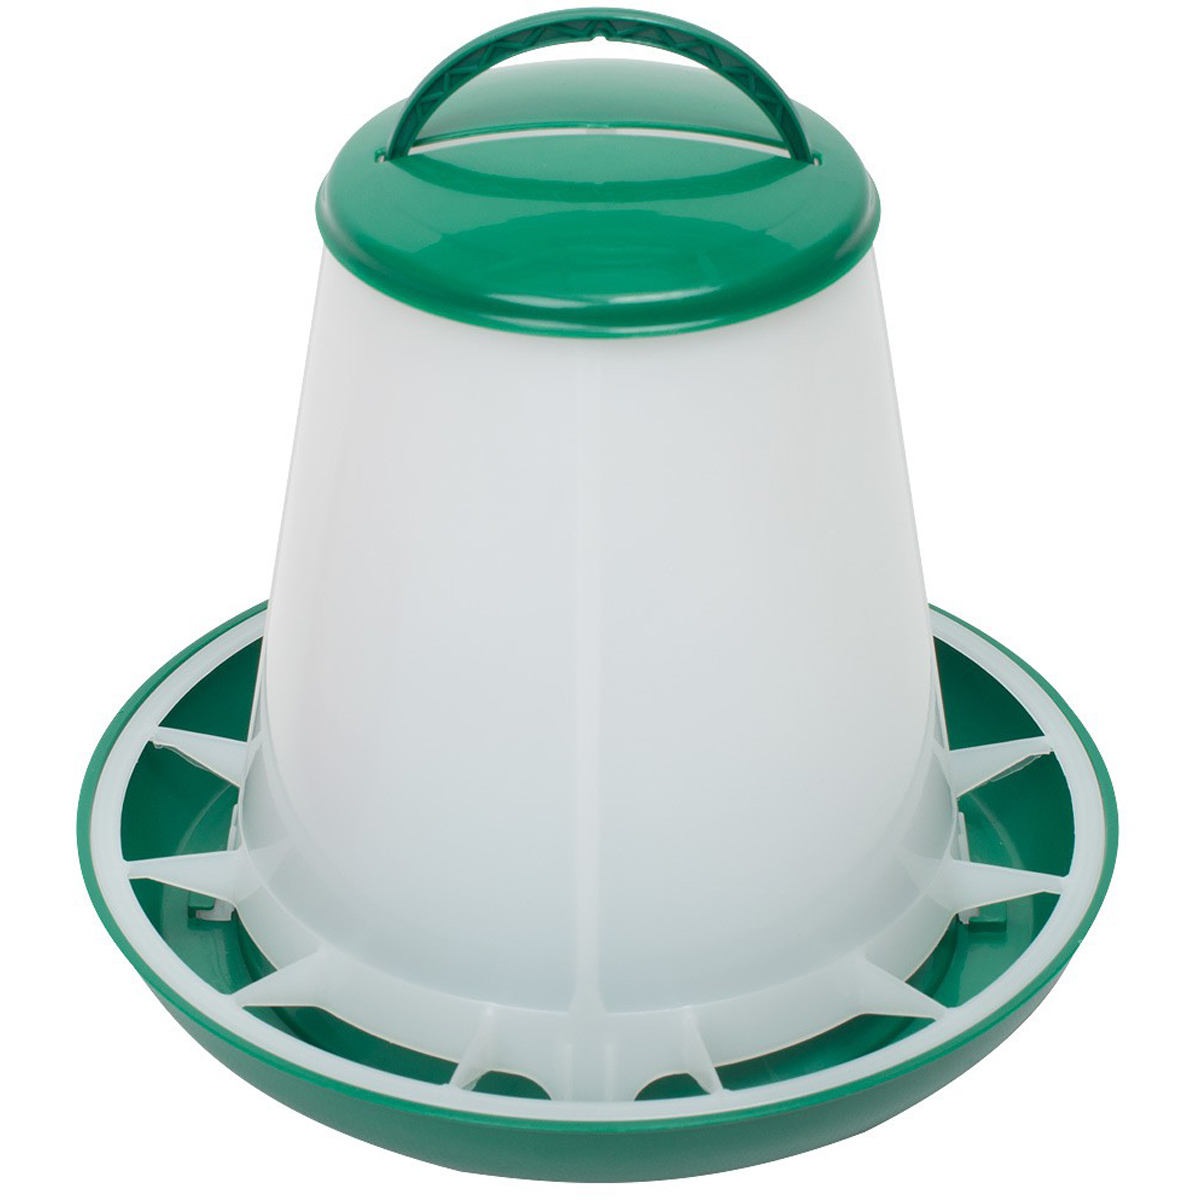 Poultry feeder with green lid 1 kg